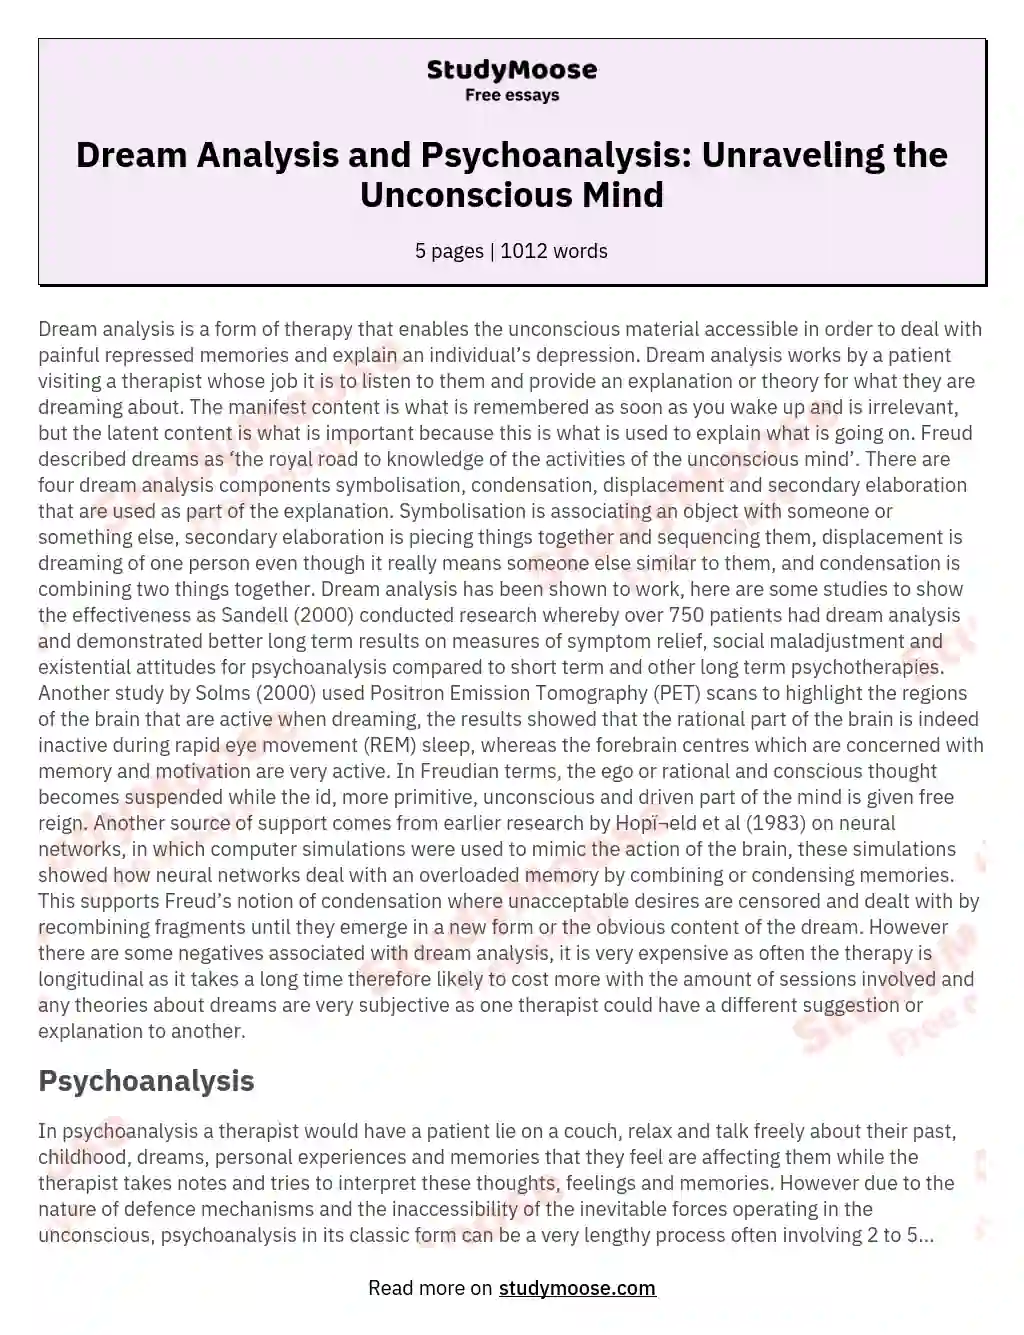 Dream Analysis and Psychoanalysis: Unraveling the Unconscious Mind essay